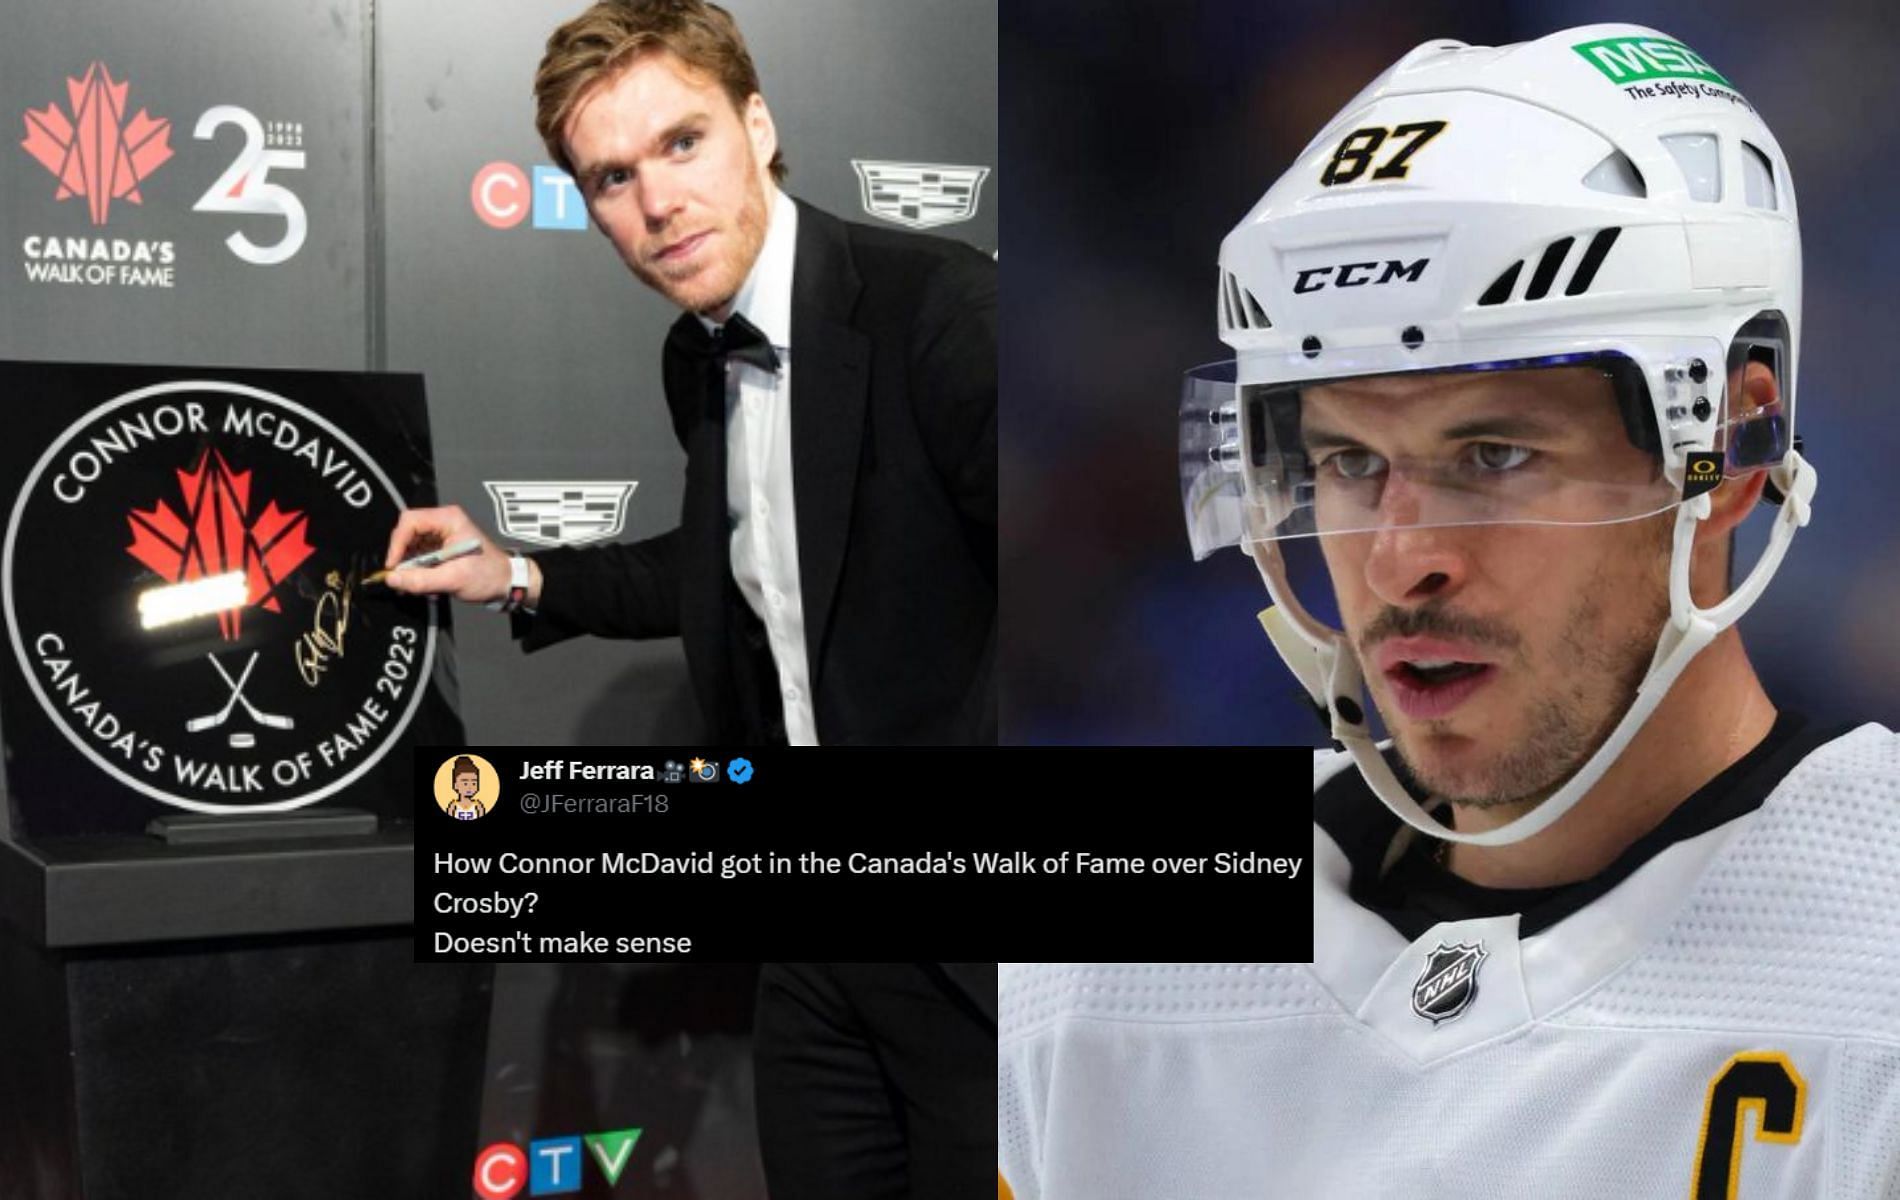 &quot;Over Sidney Crosby?&quot;: Connor McDavid